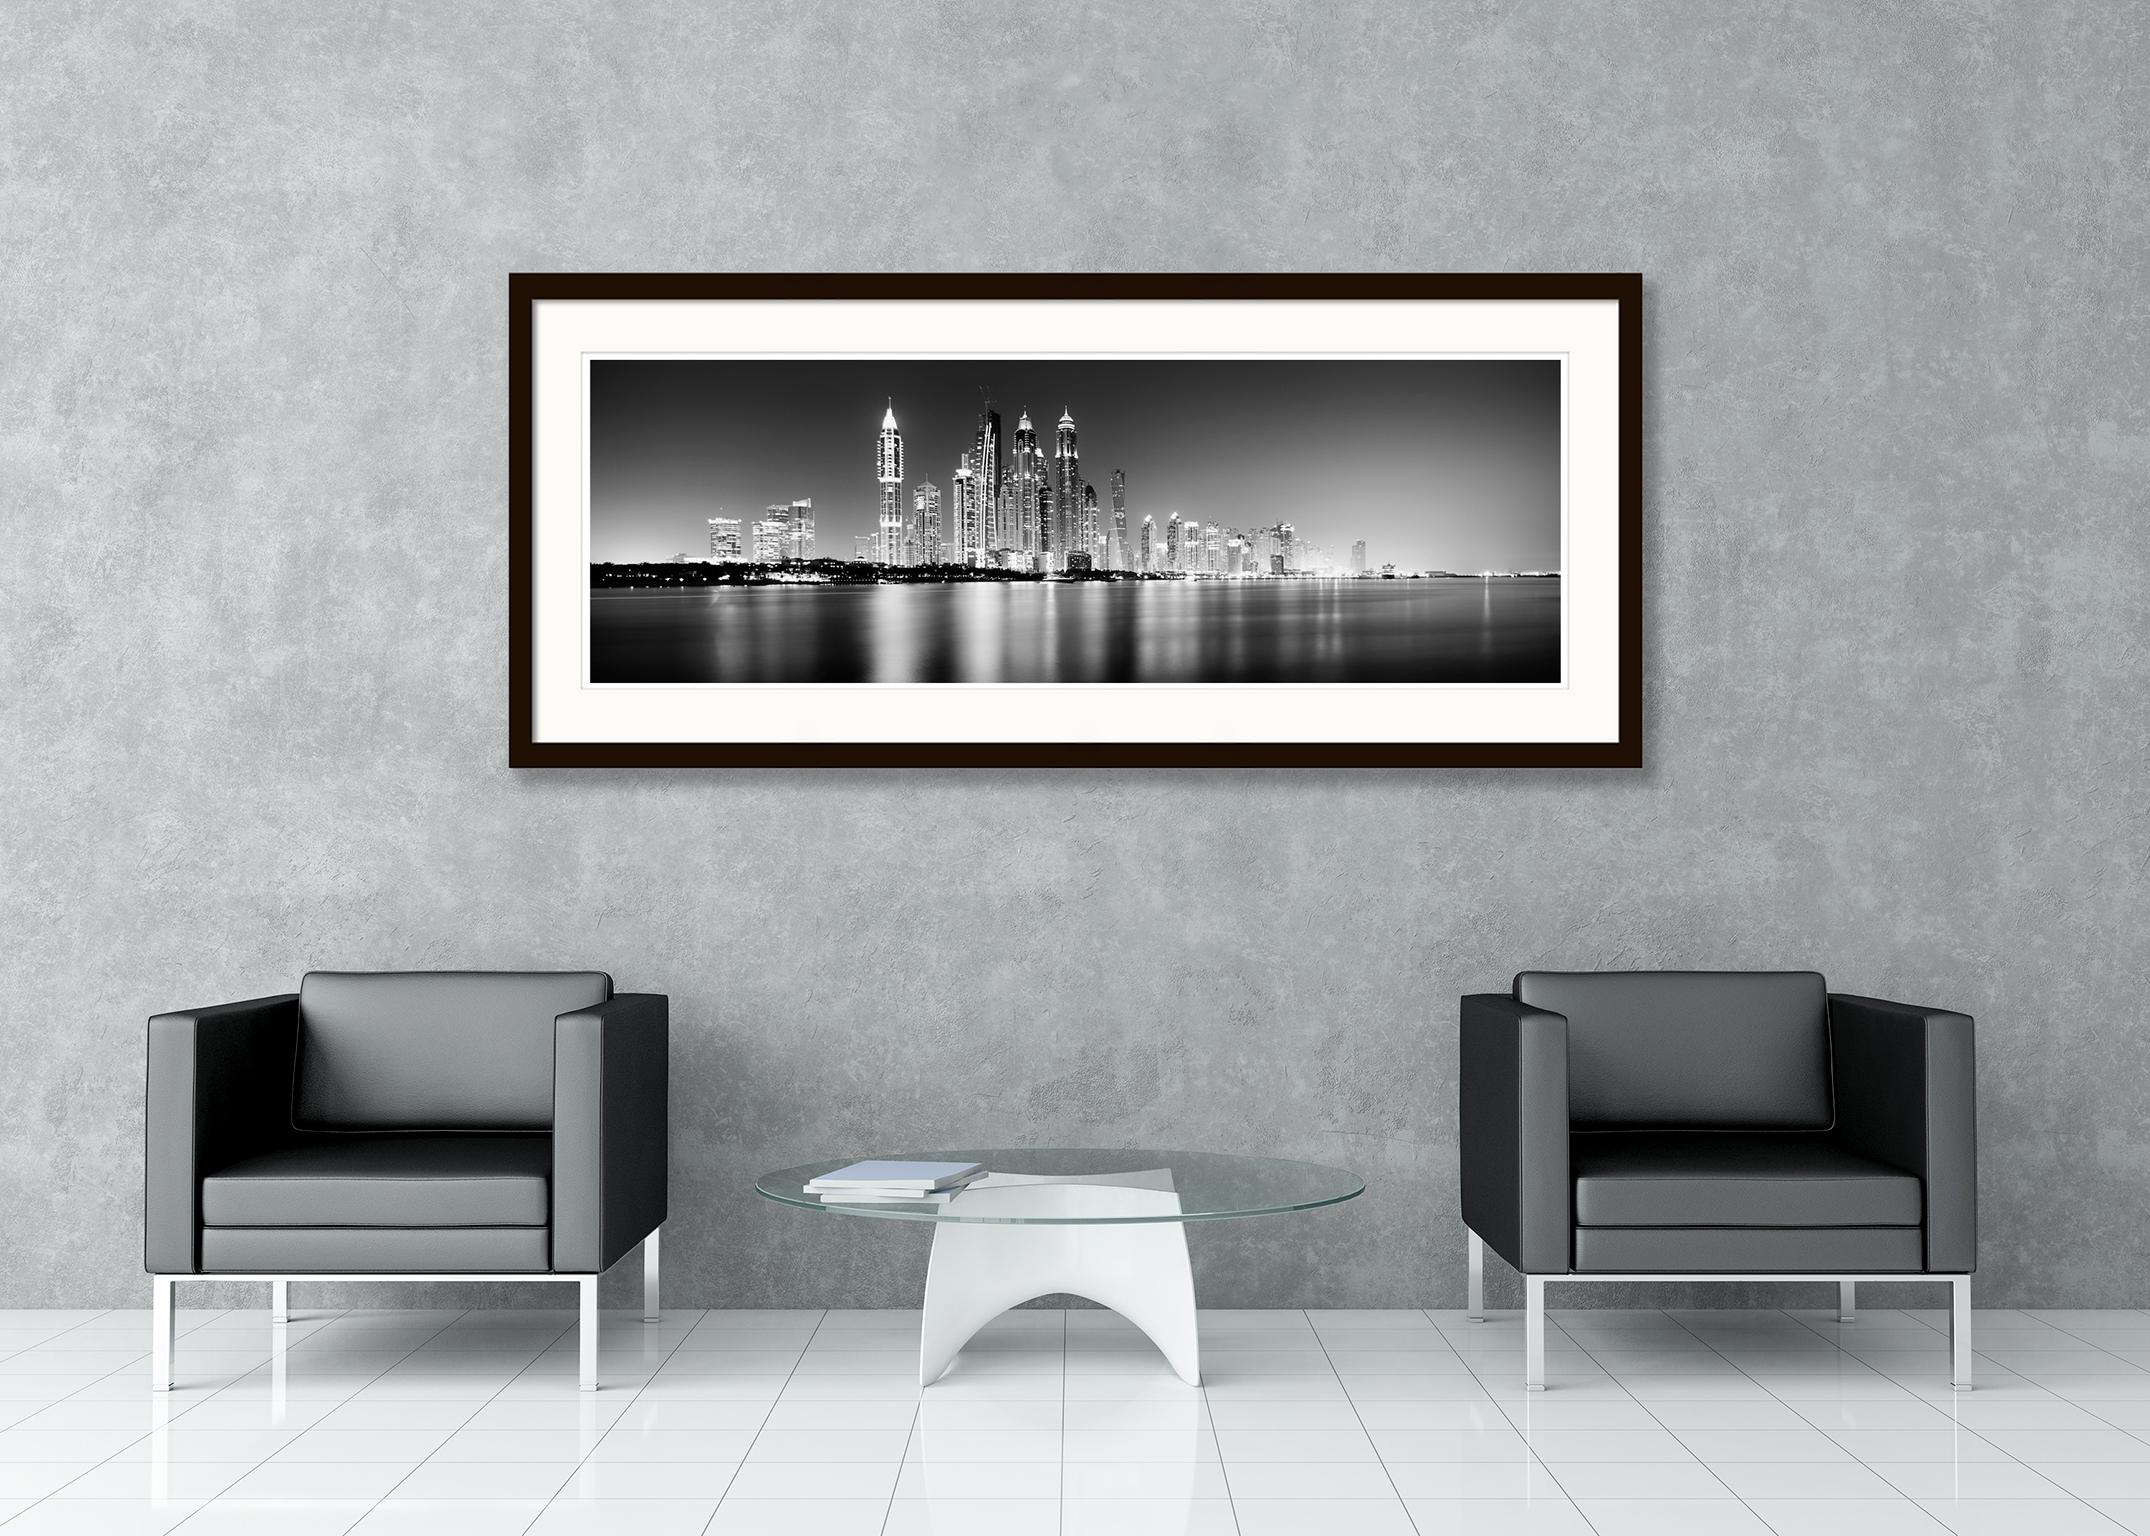 Marina Night Panorama, Dubai, black and white fine art photography, landscape - Contemporary Photograph by Gerald Berghammer, Ina Forstinger